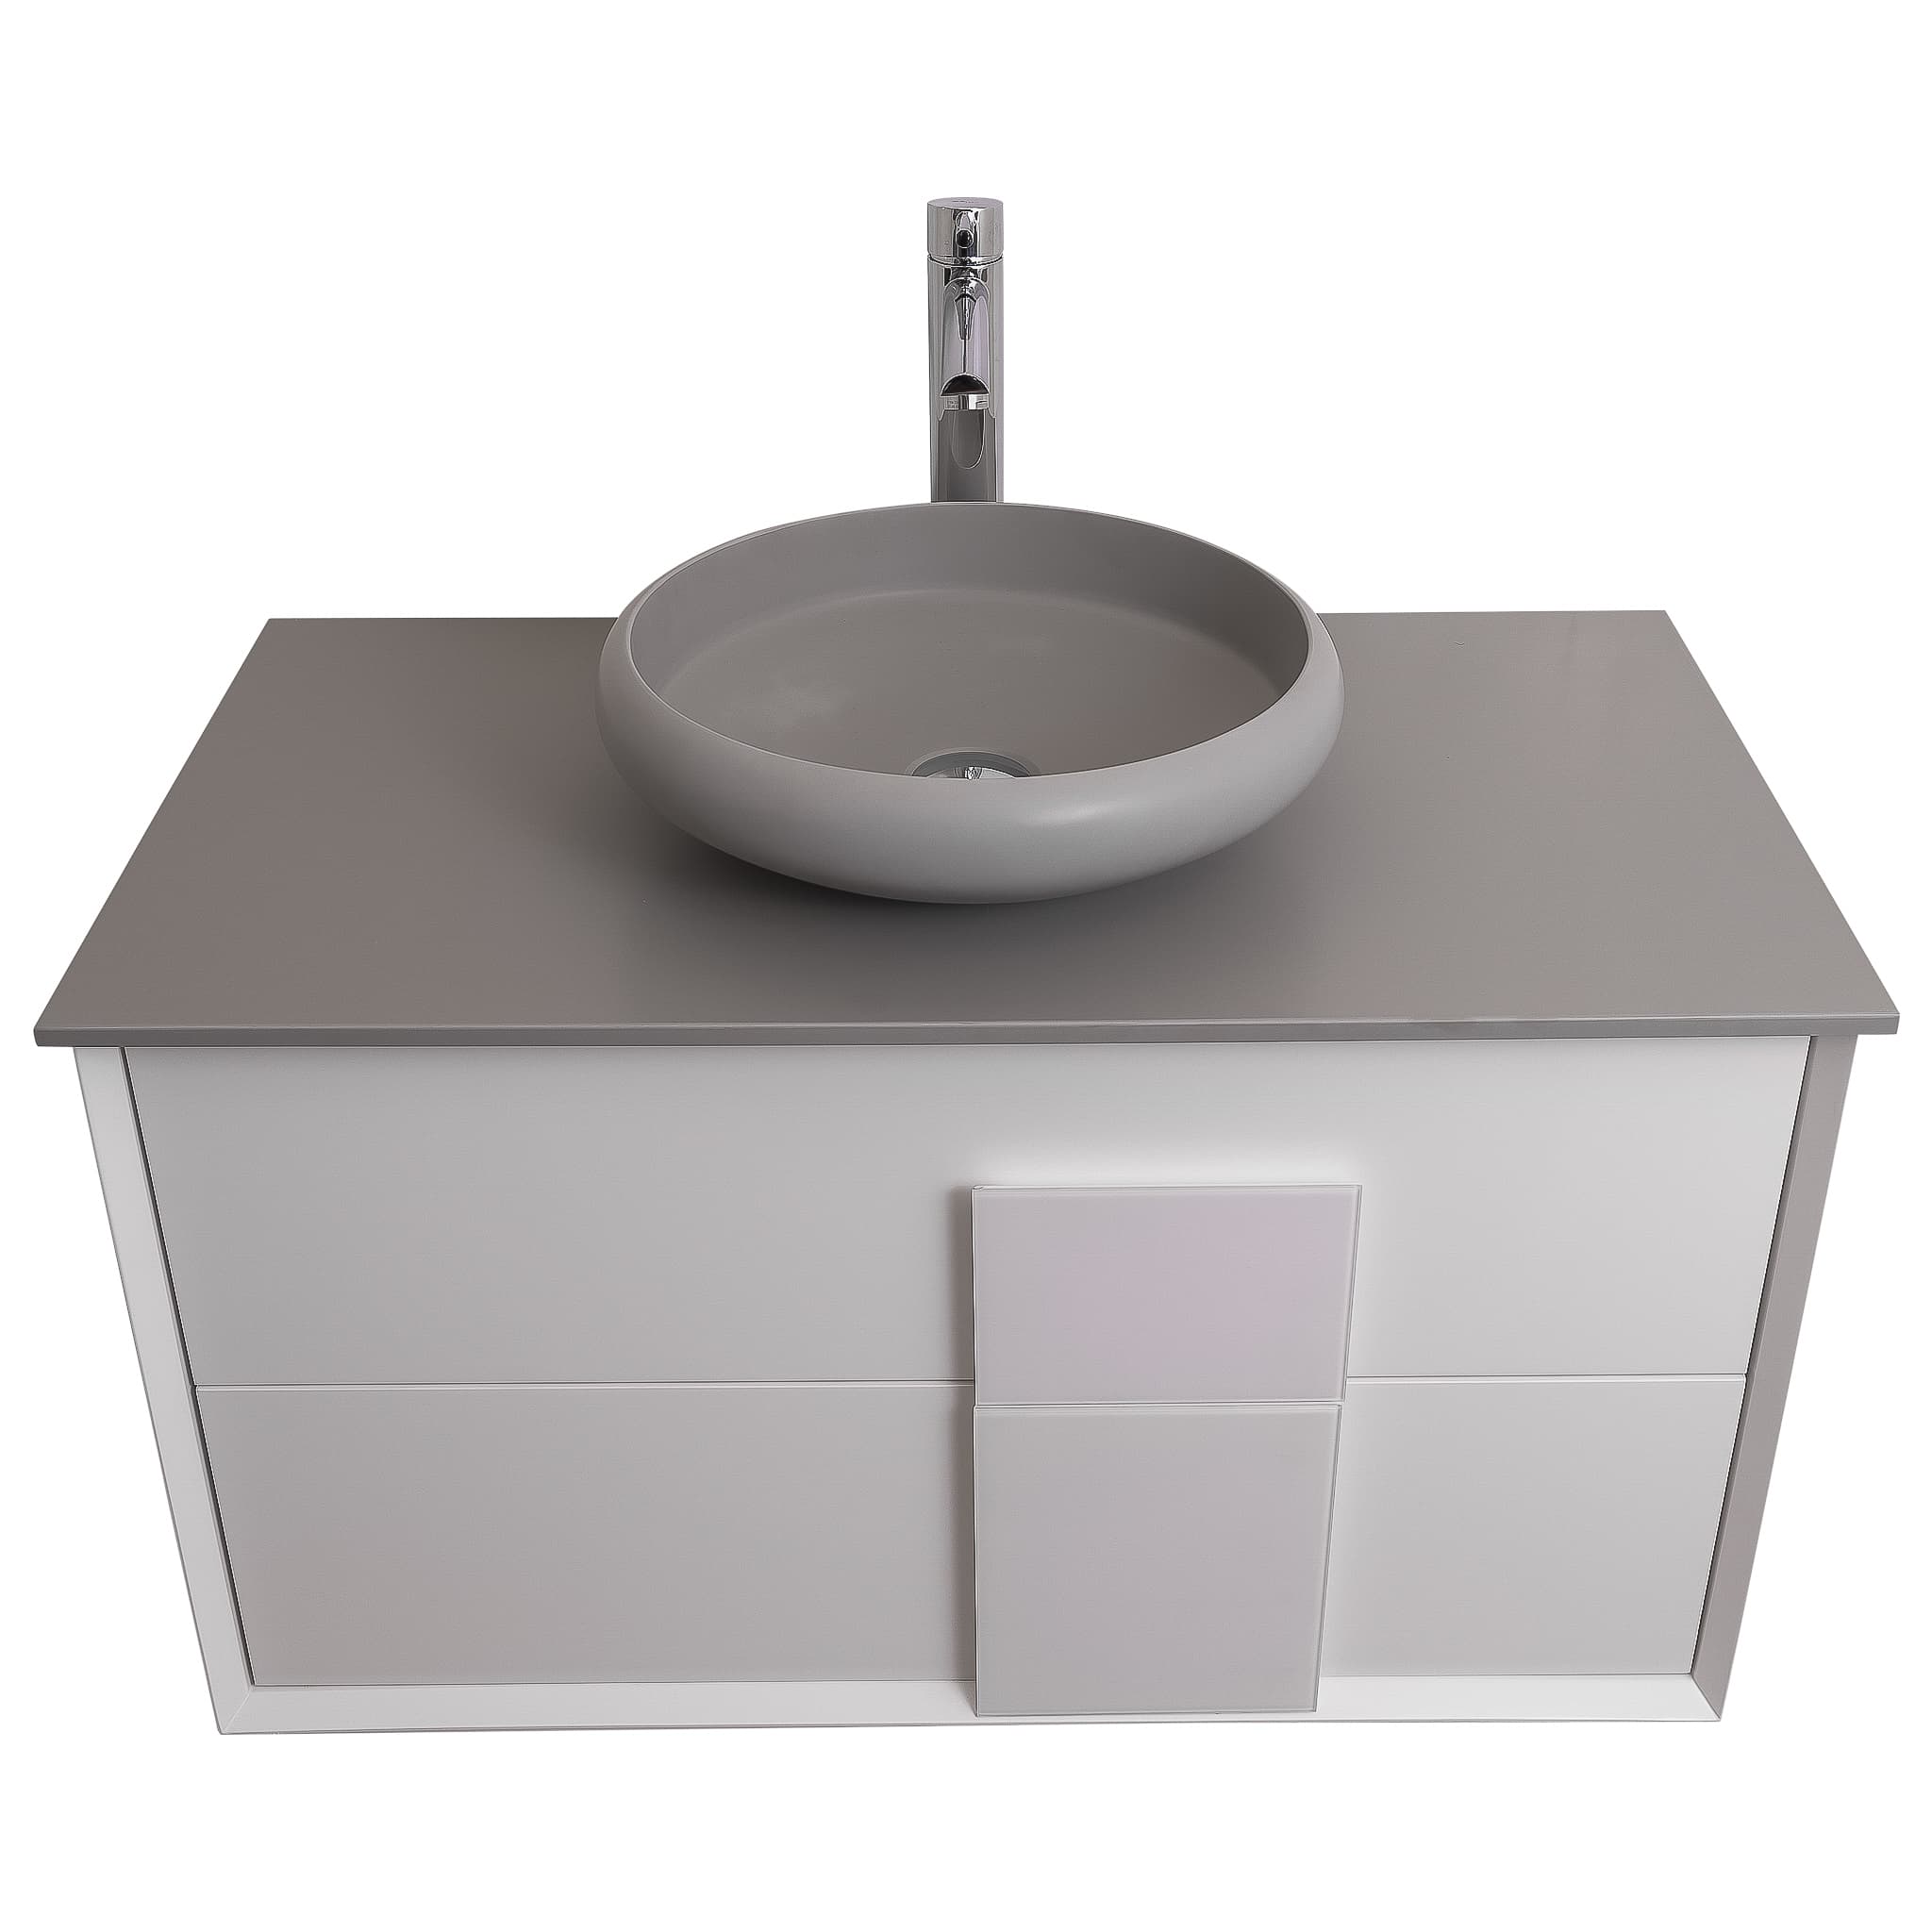 Piazza 31.5 Matte White With White Handle Cabinet, Solid Surface Flat Grey Counter and Round Solid Surface Grey Basin 1153, Wall Mounted Modern Vanity Set